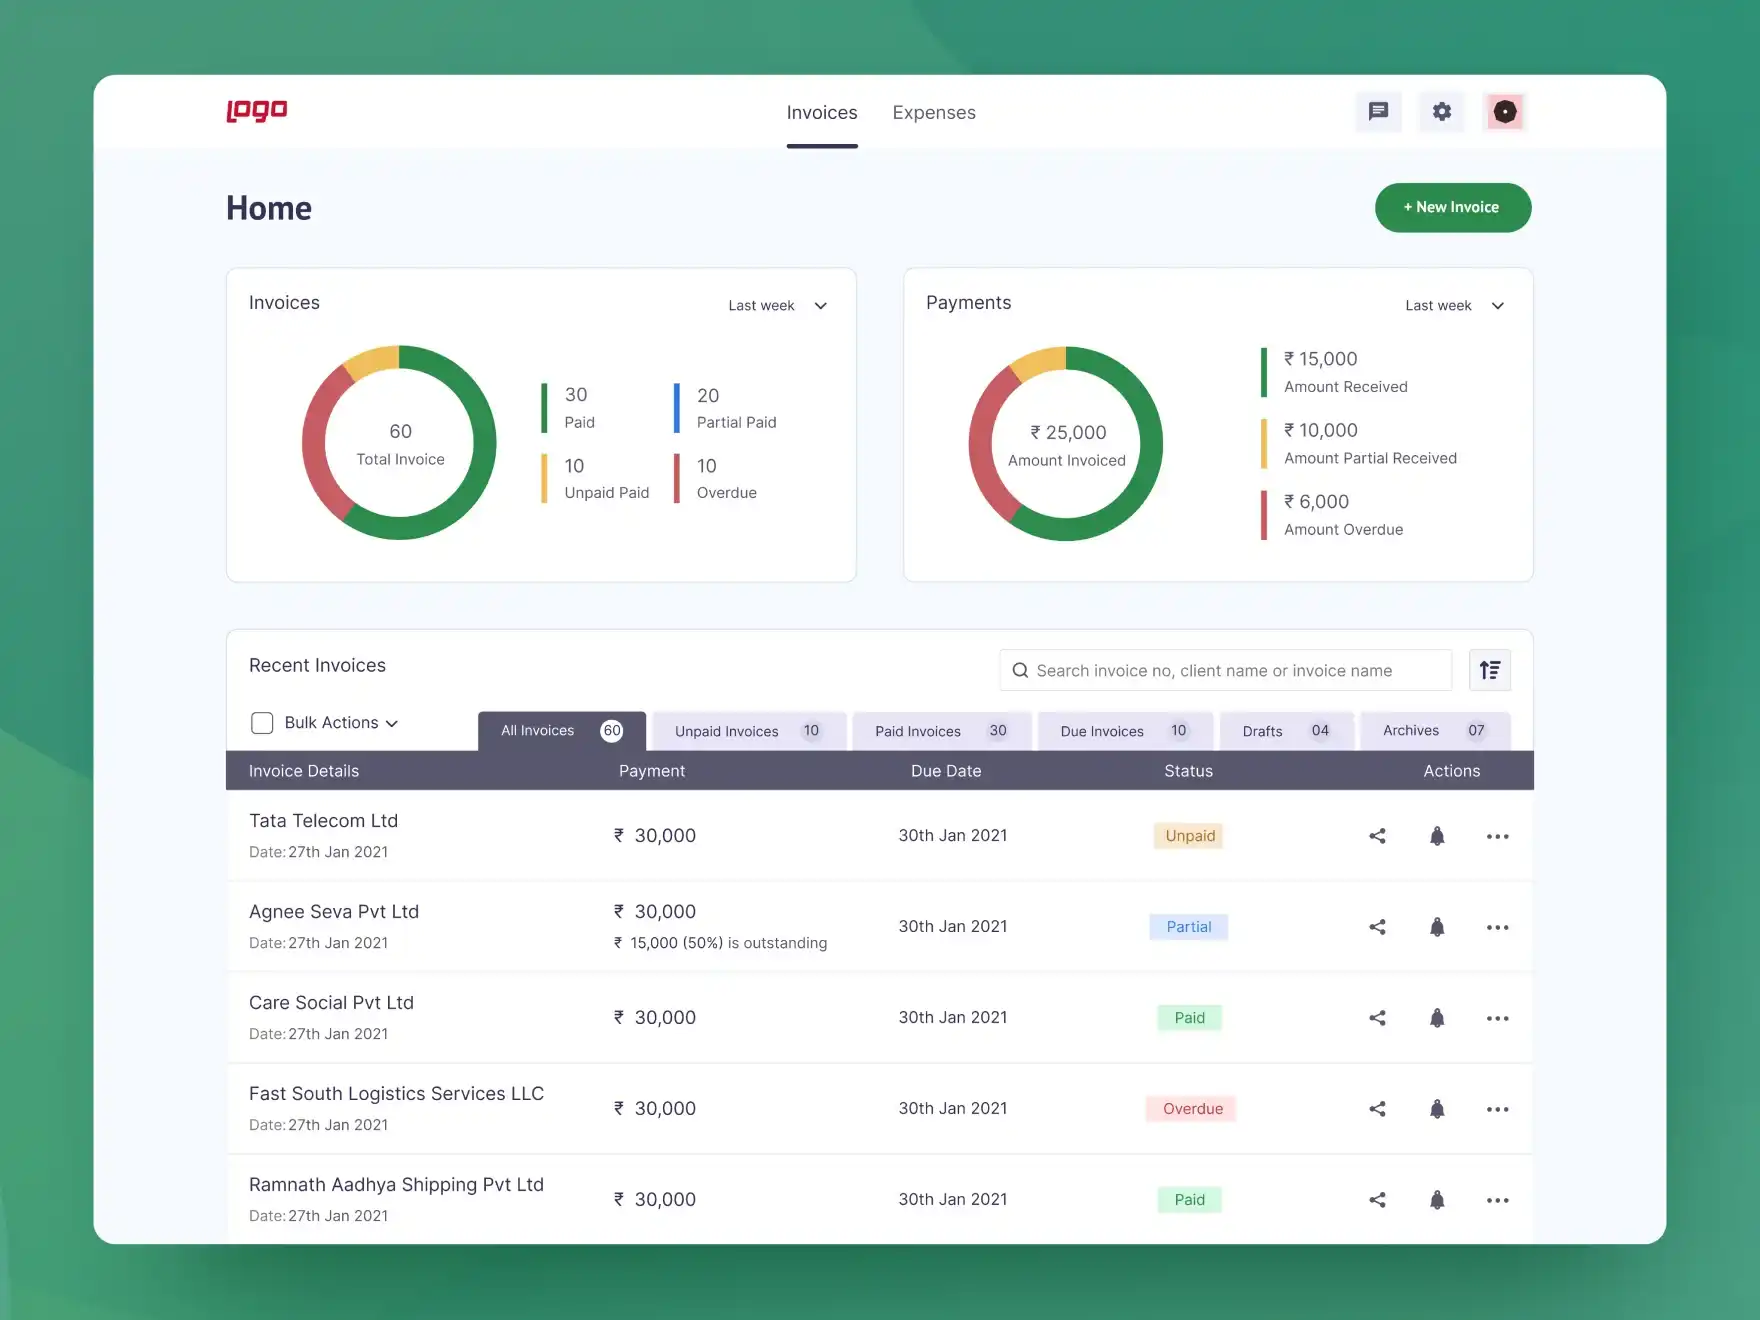 UI UX dashboard to check the invoice status